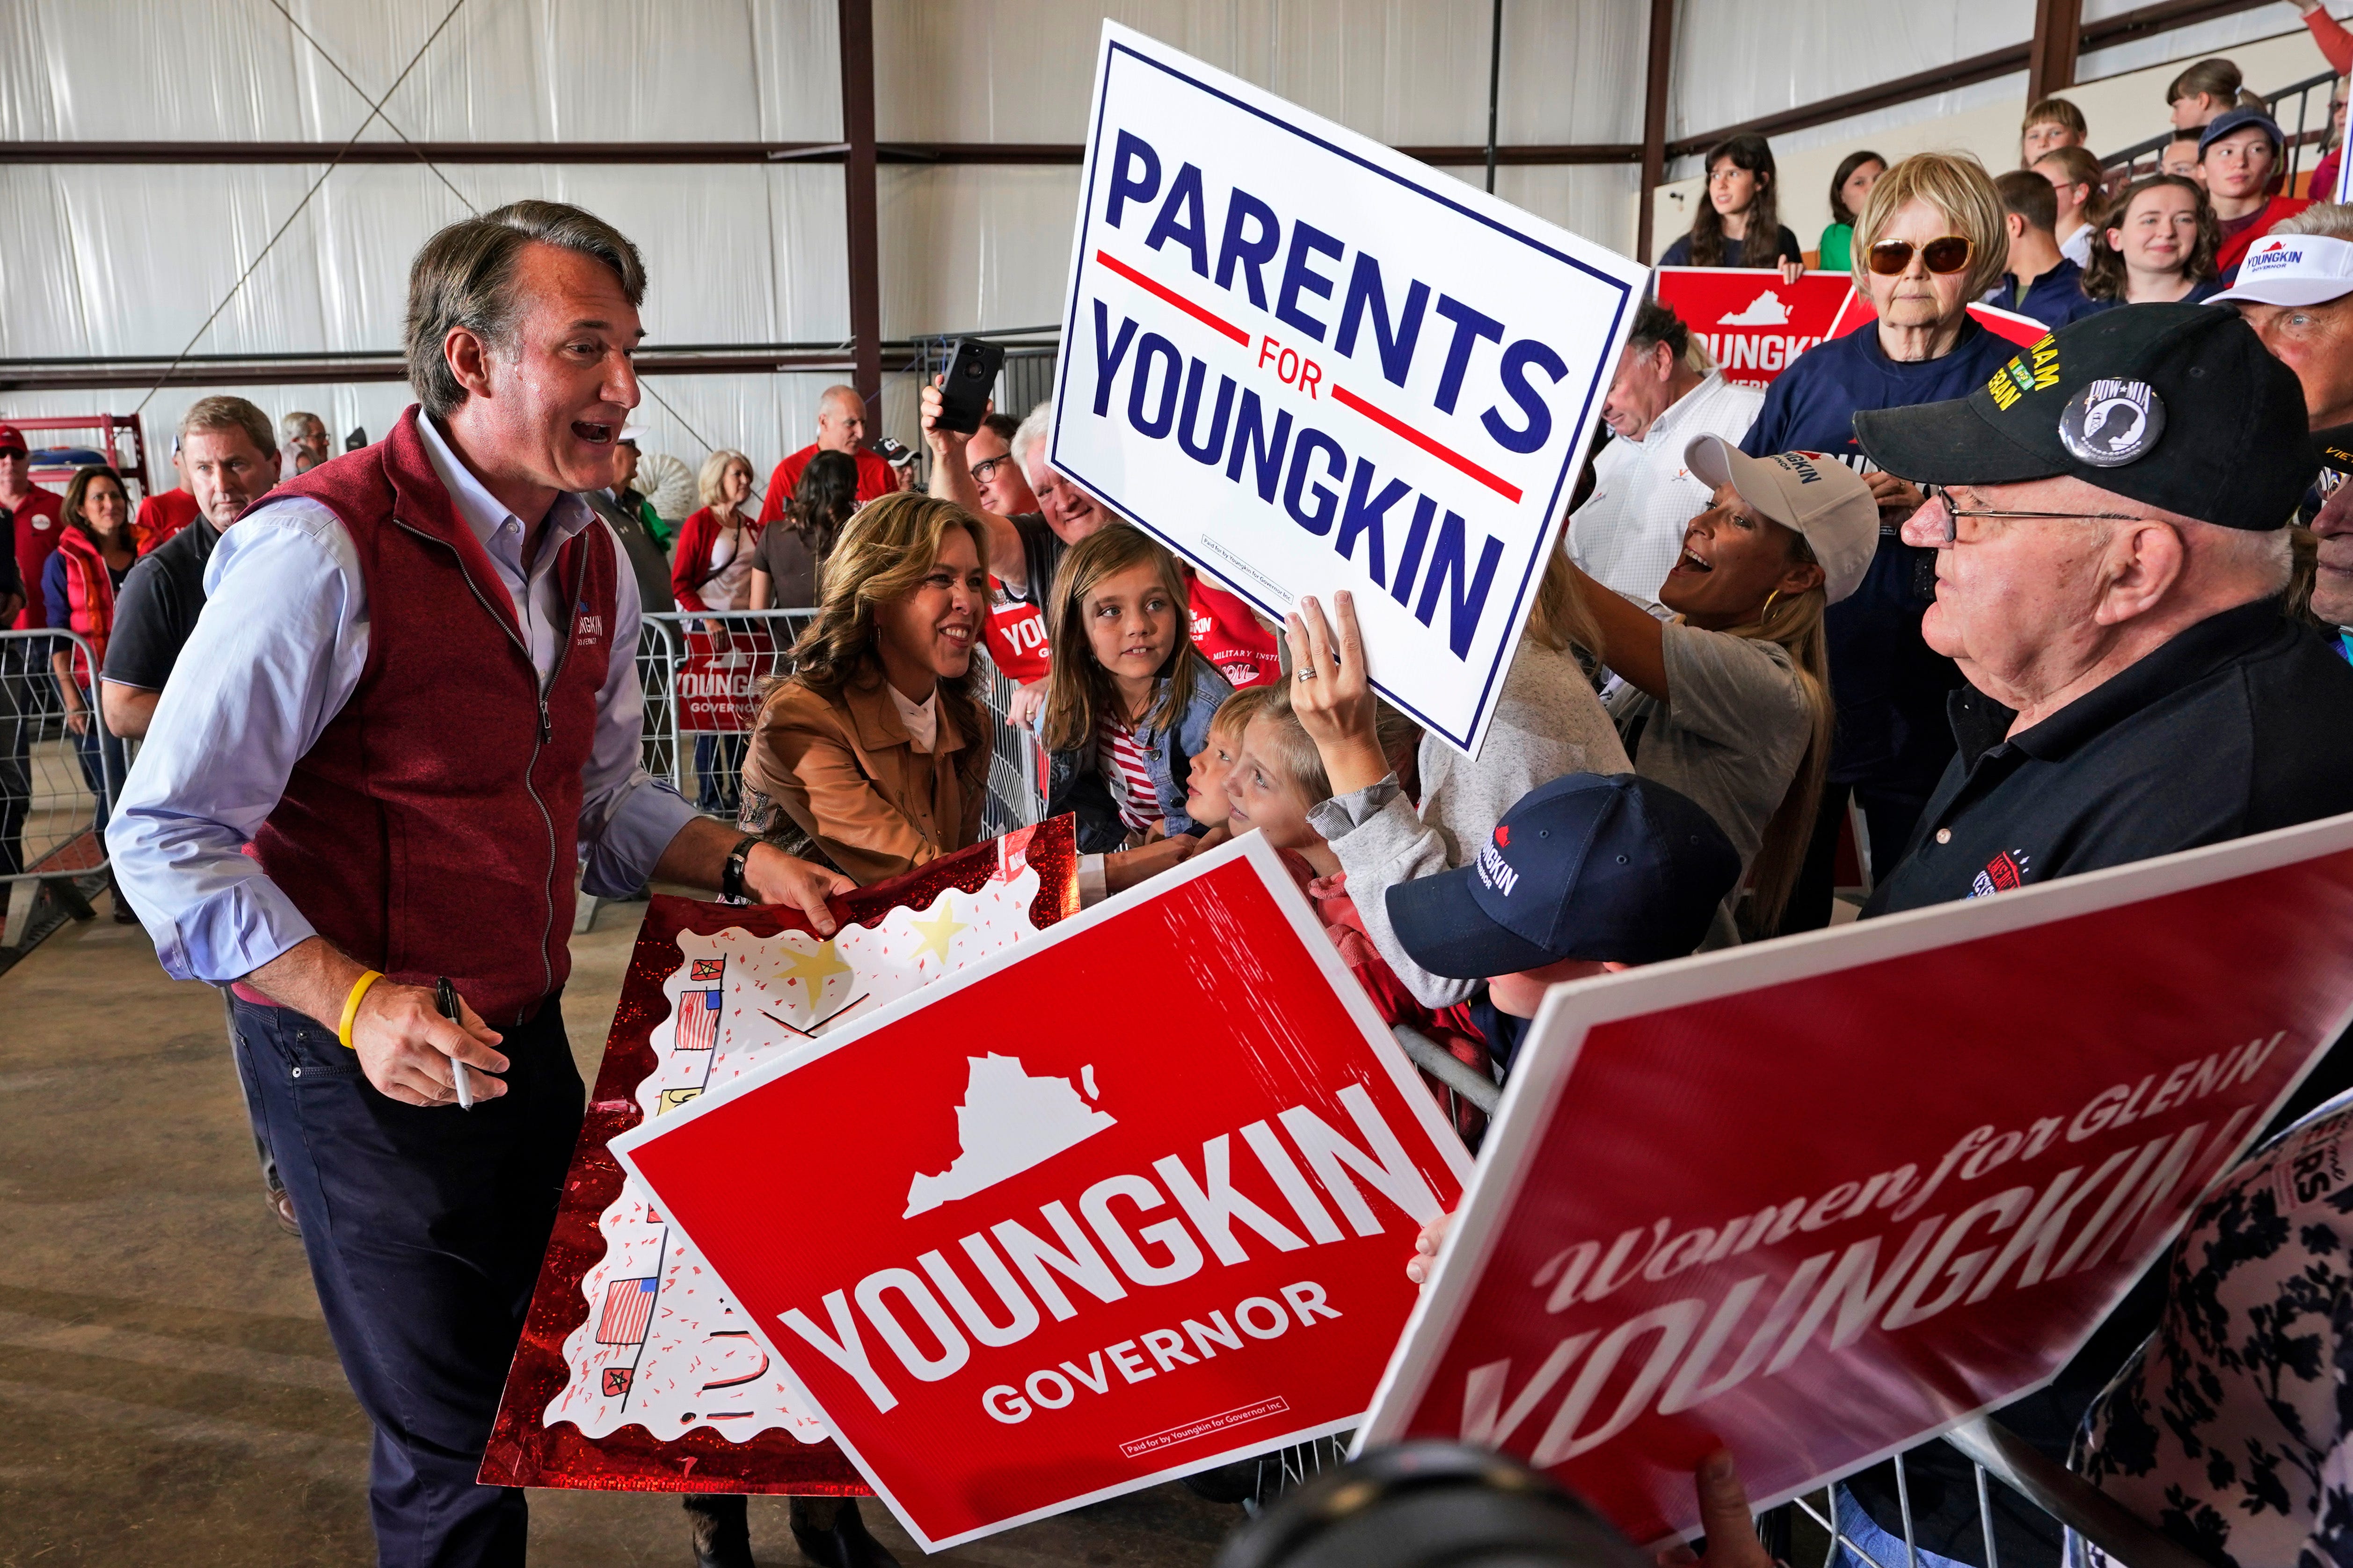 Republican gubernatorial candidate Glenn Youngkin and his wife, Suzanne, second from left, greet supporters during a rally in Chesterfield, Va., on Nov. 1, 2021.